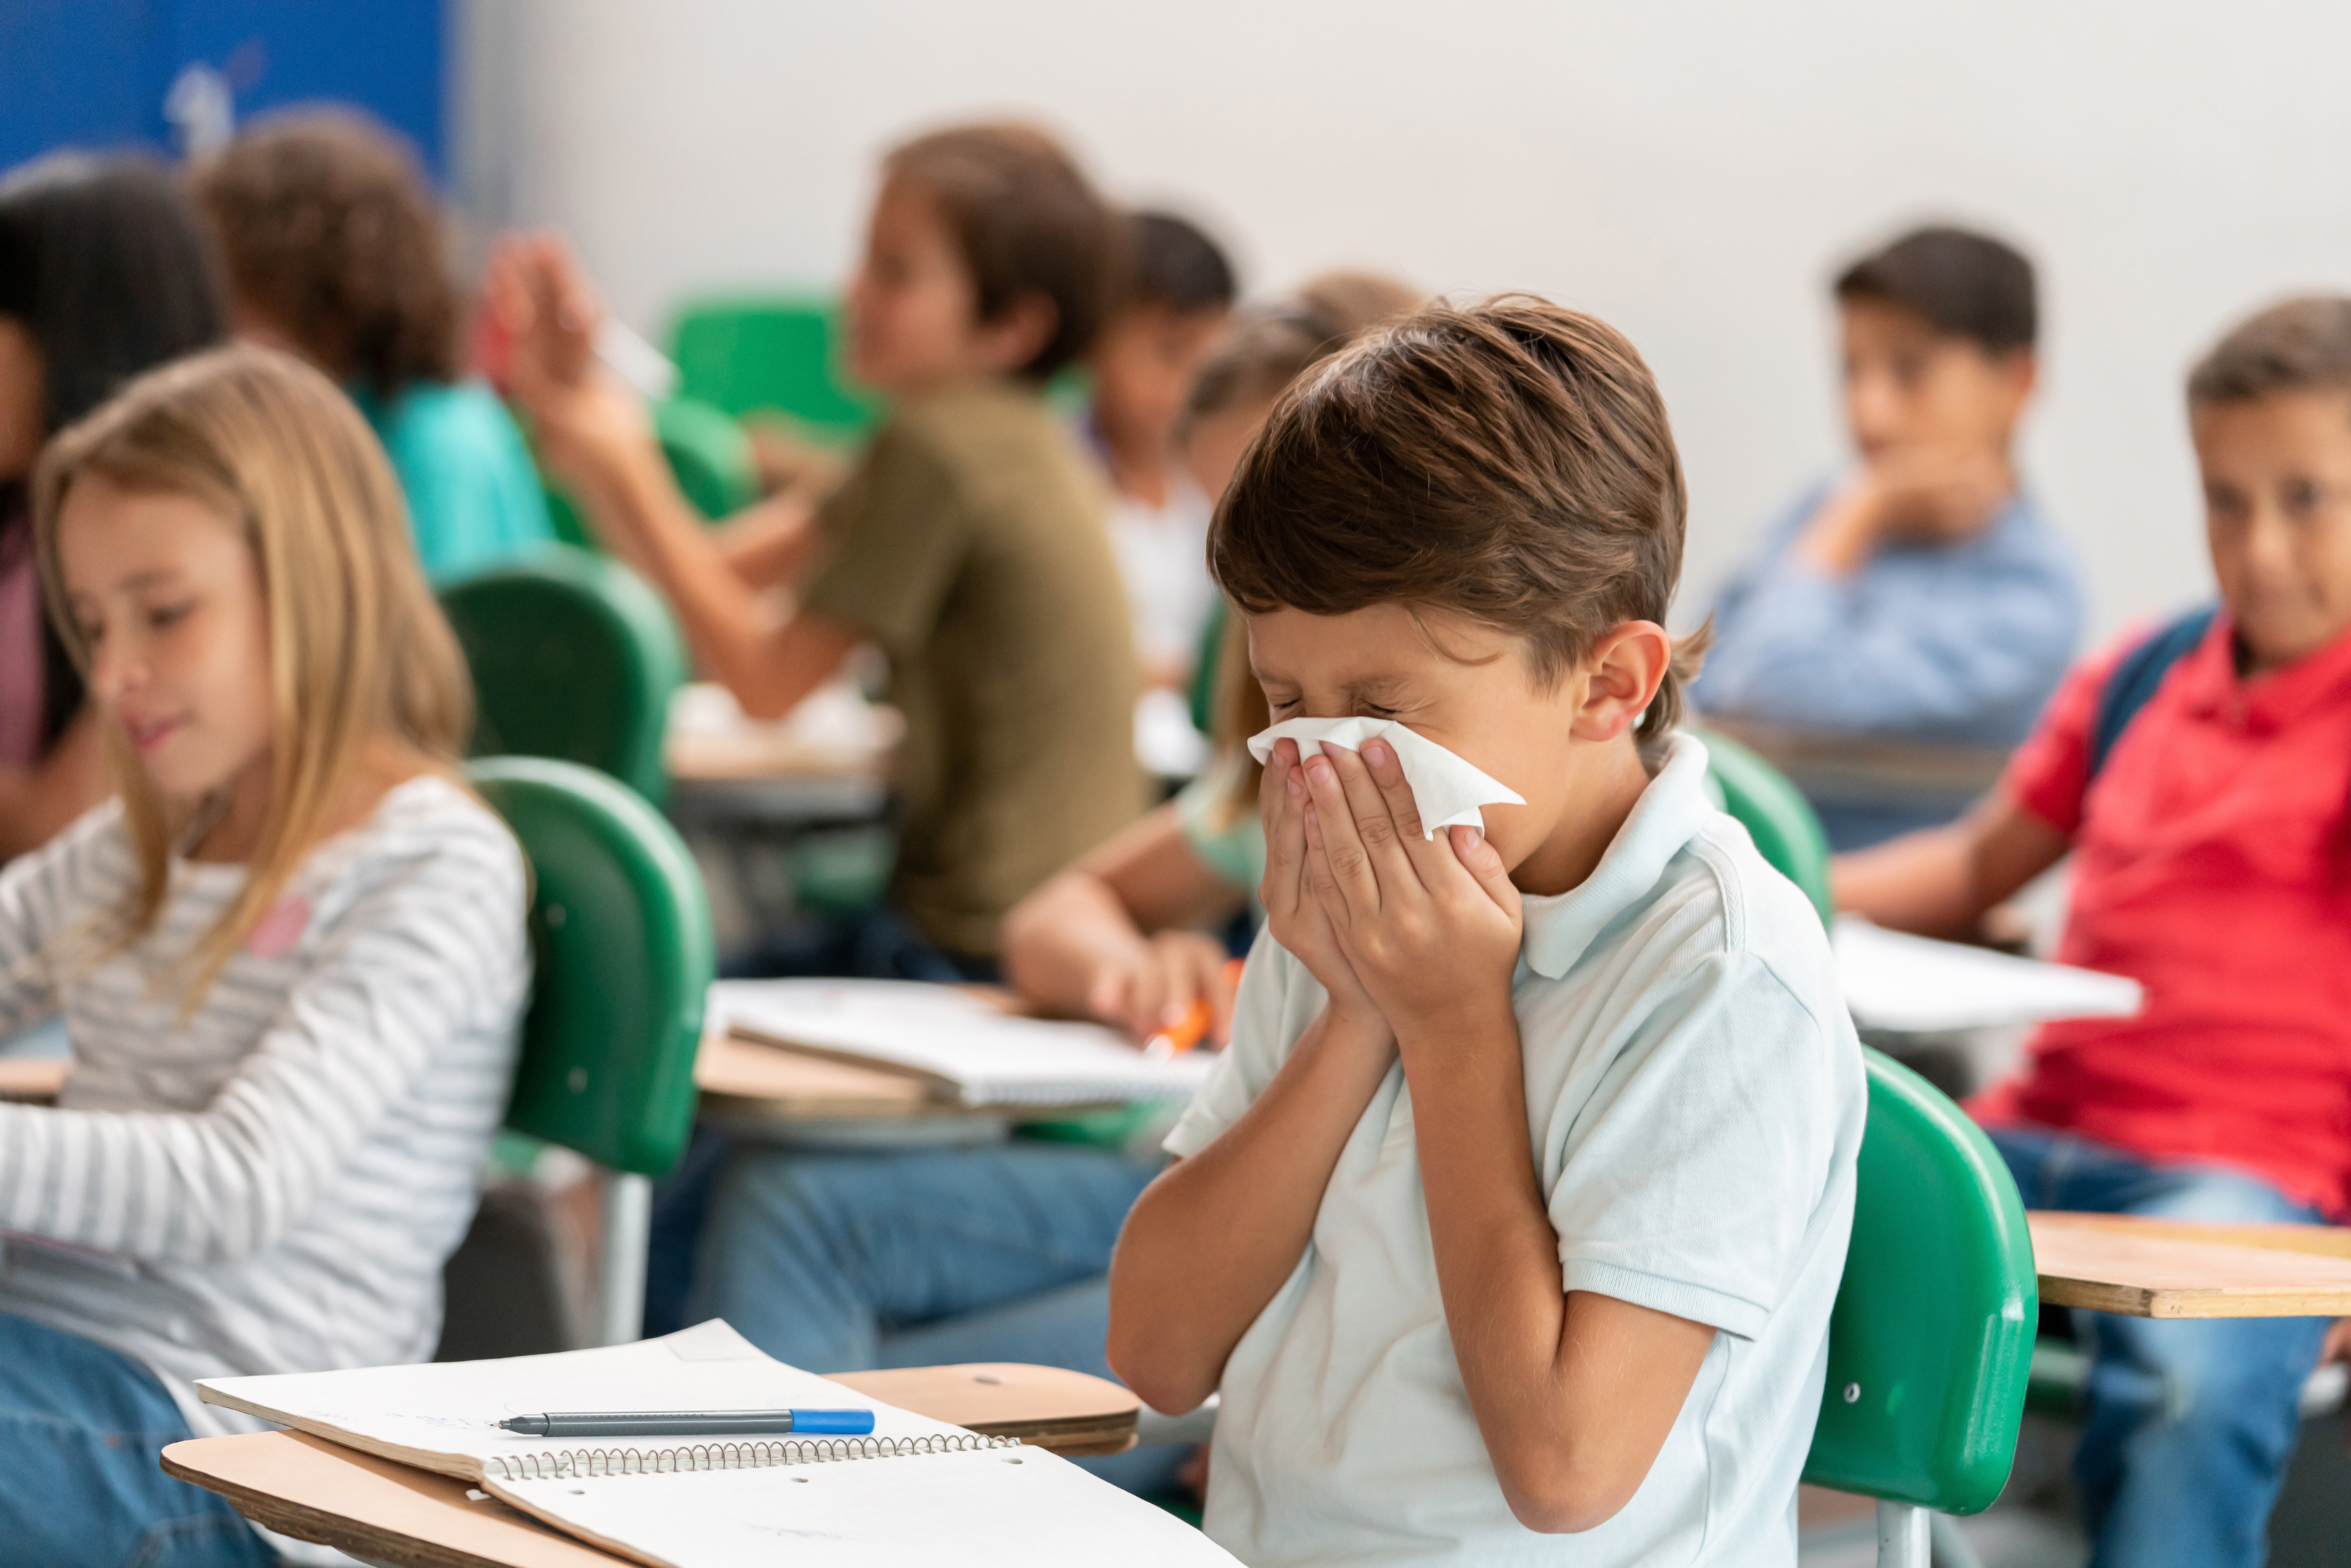 Child in classroom sneezing into tissue, surrounded by other students